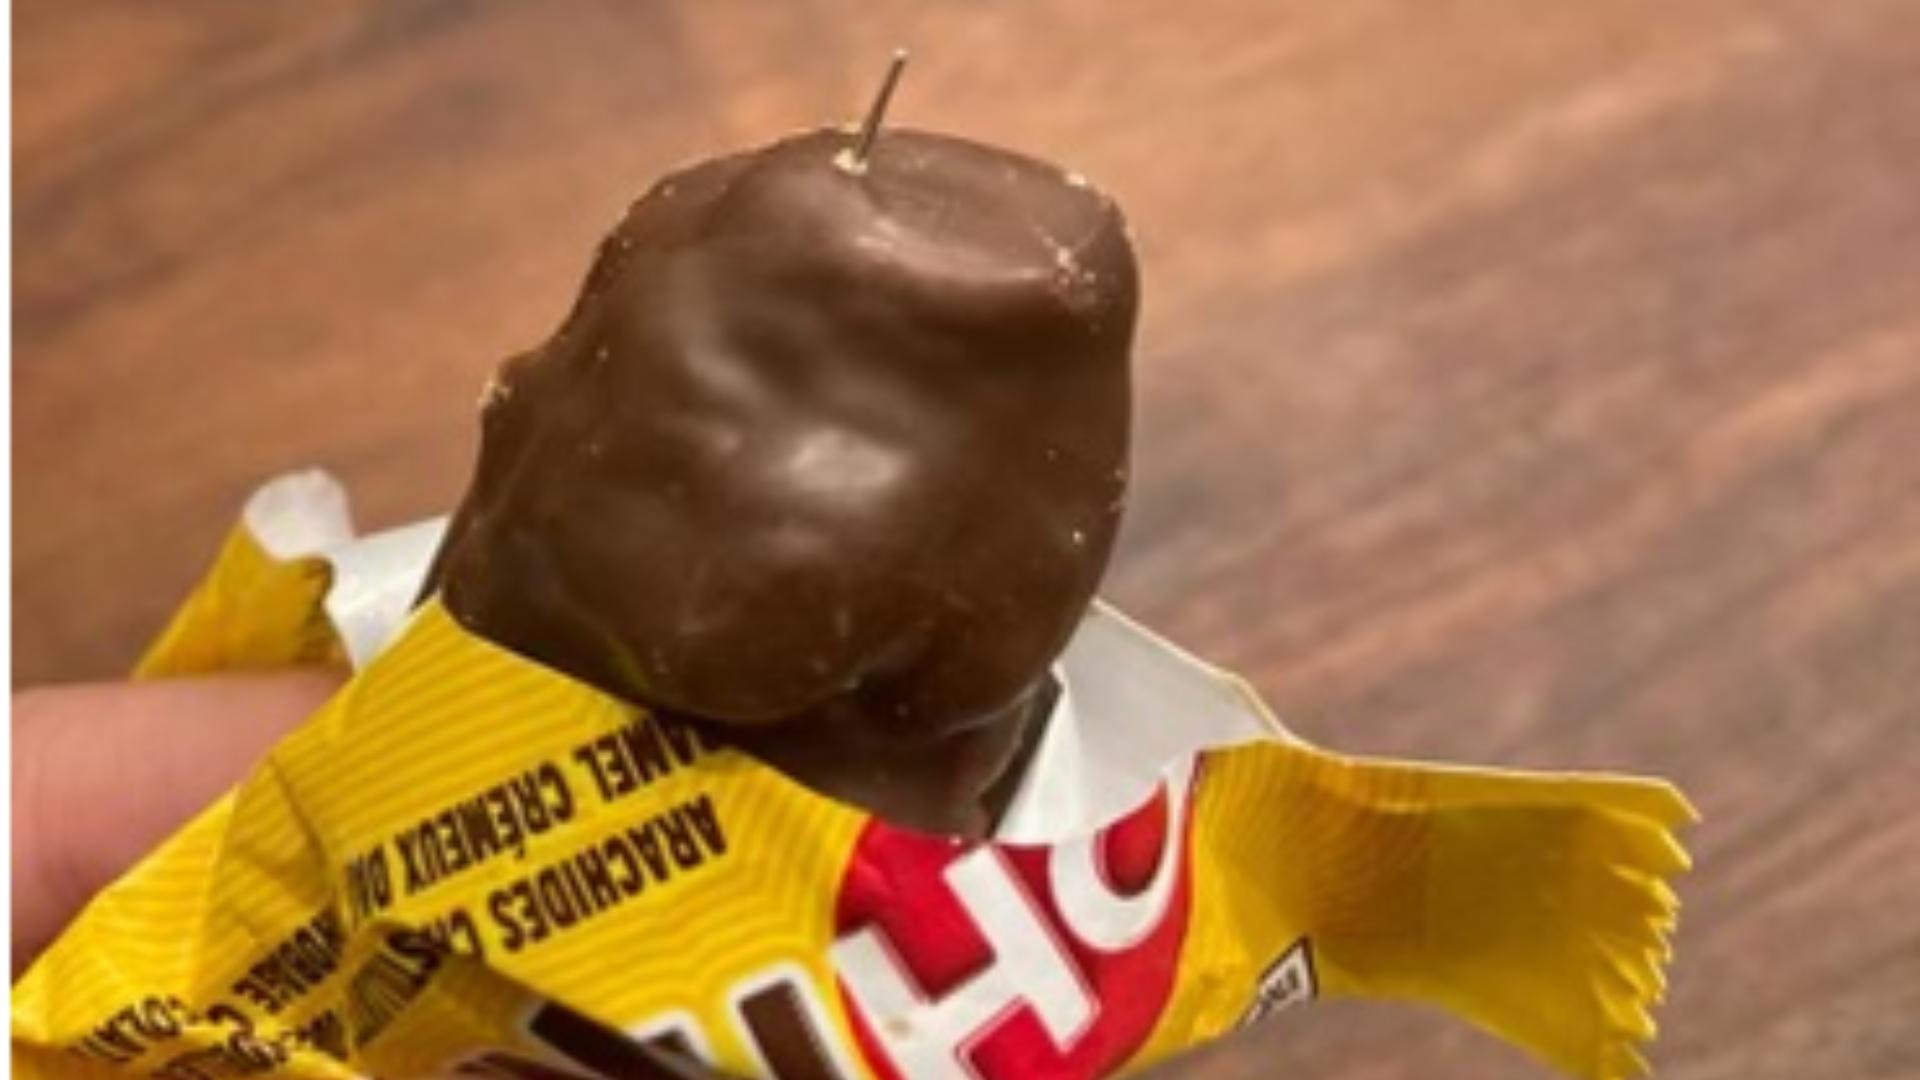 Police Investigating Needle Found in Halloween Candy